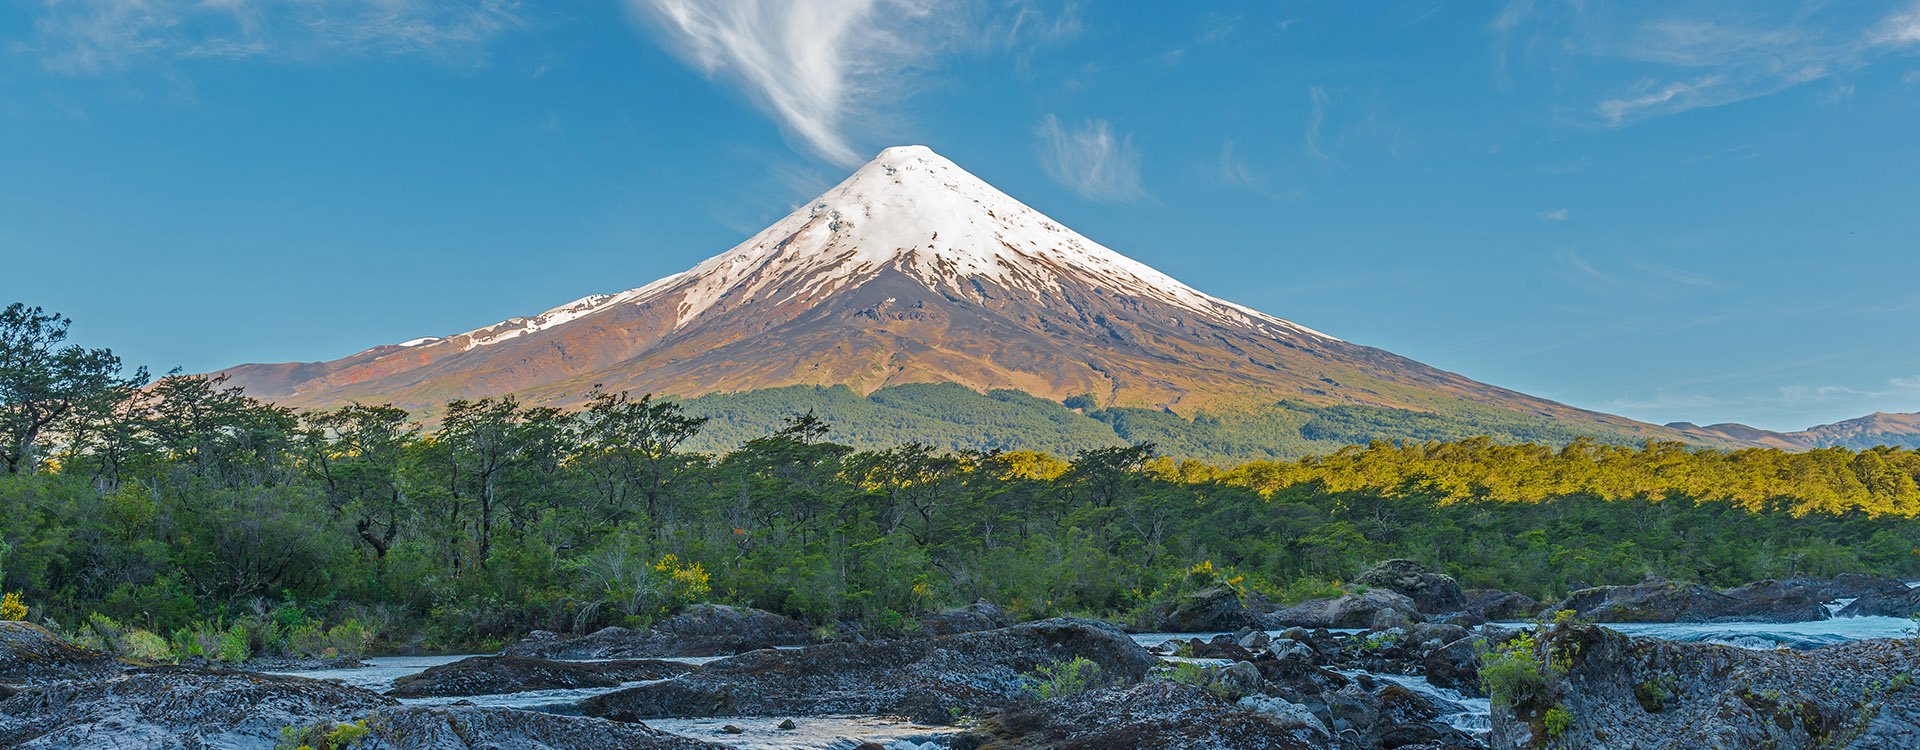 The Osorno volcano during daytime seen from the Petrohue waterfalls near Puerto Varas in South Chile